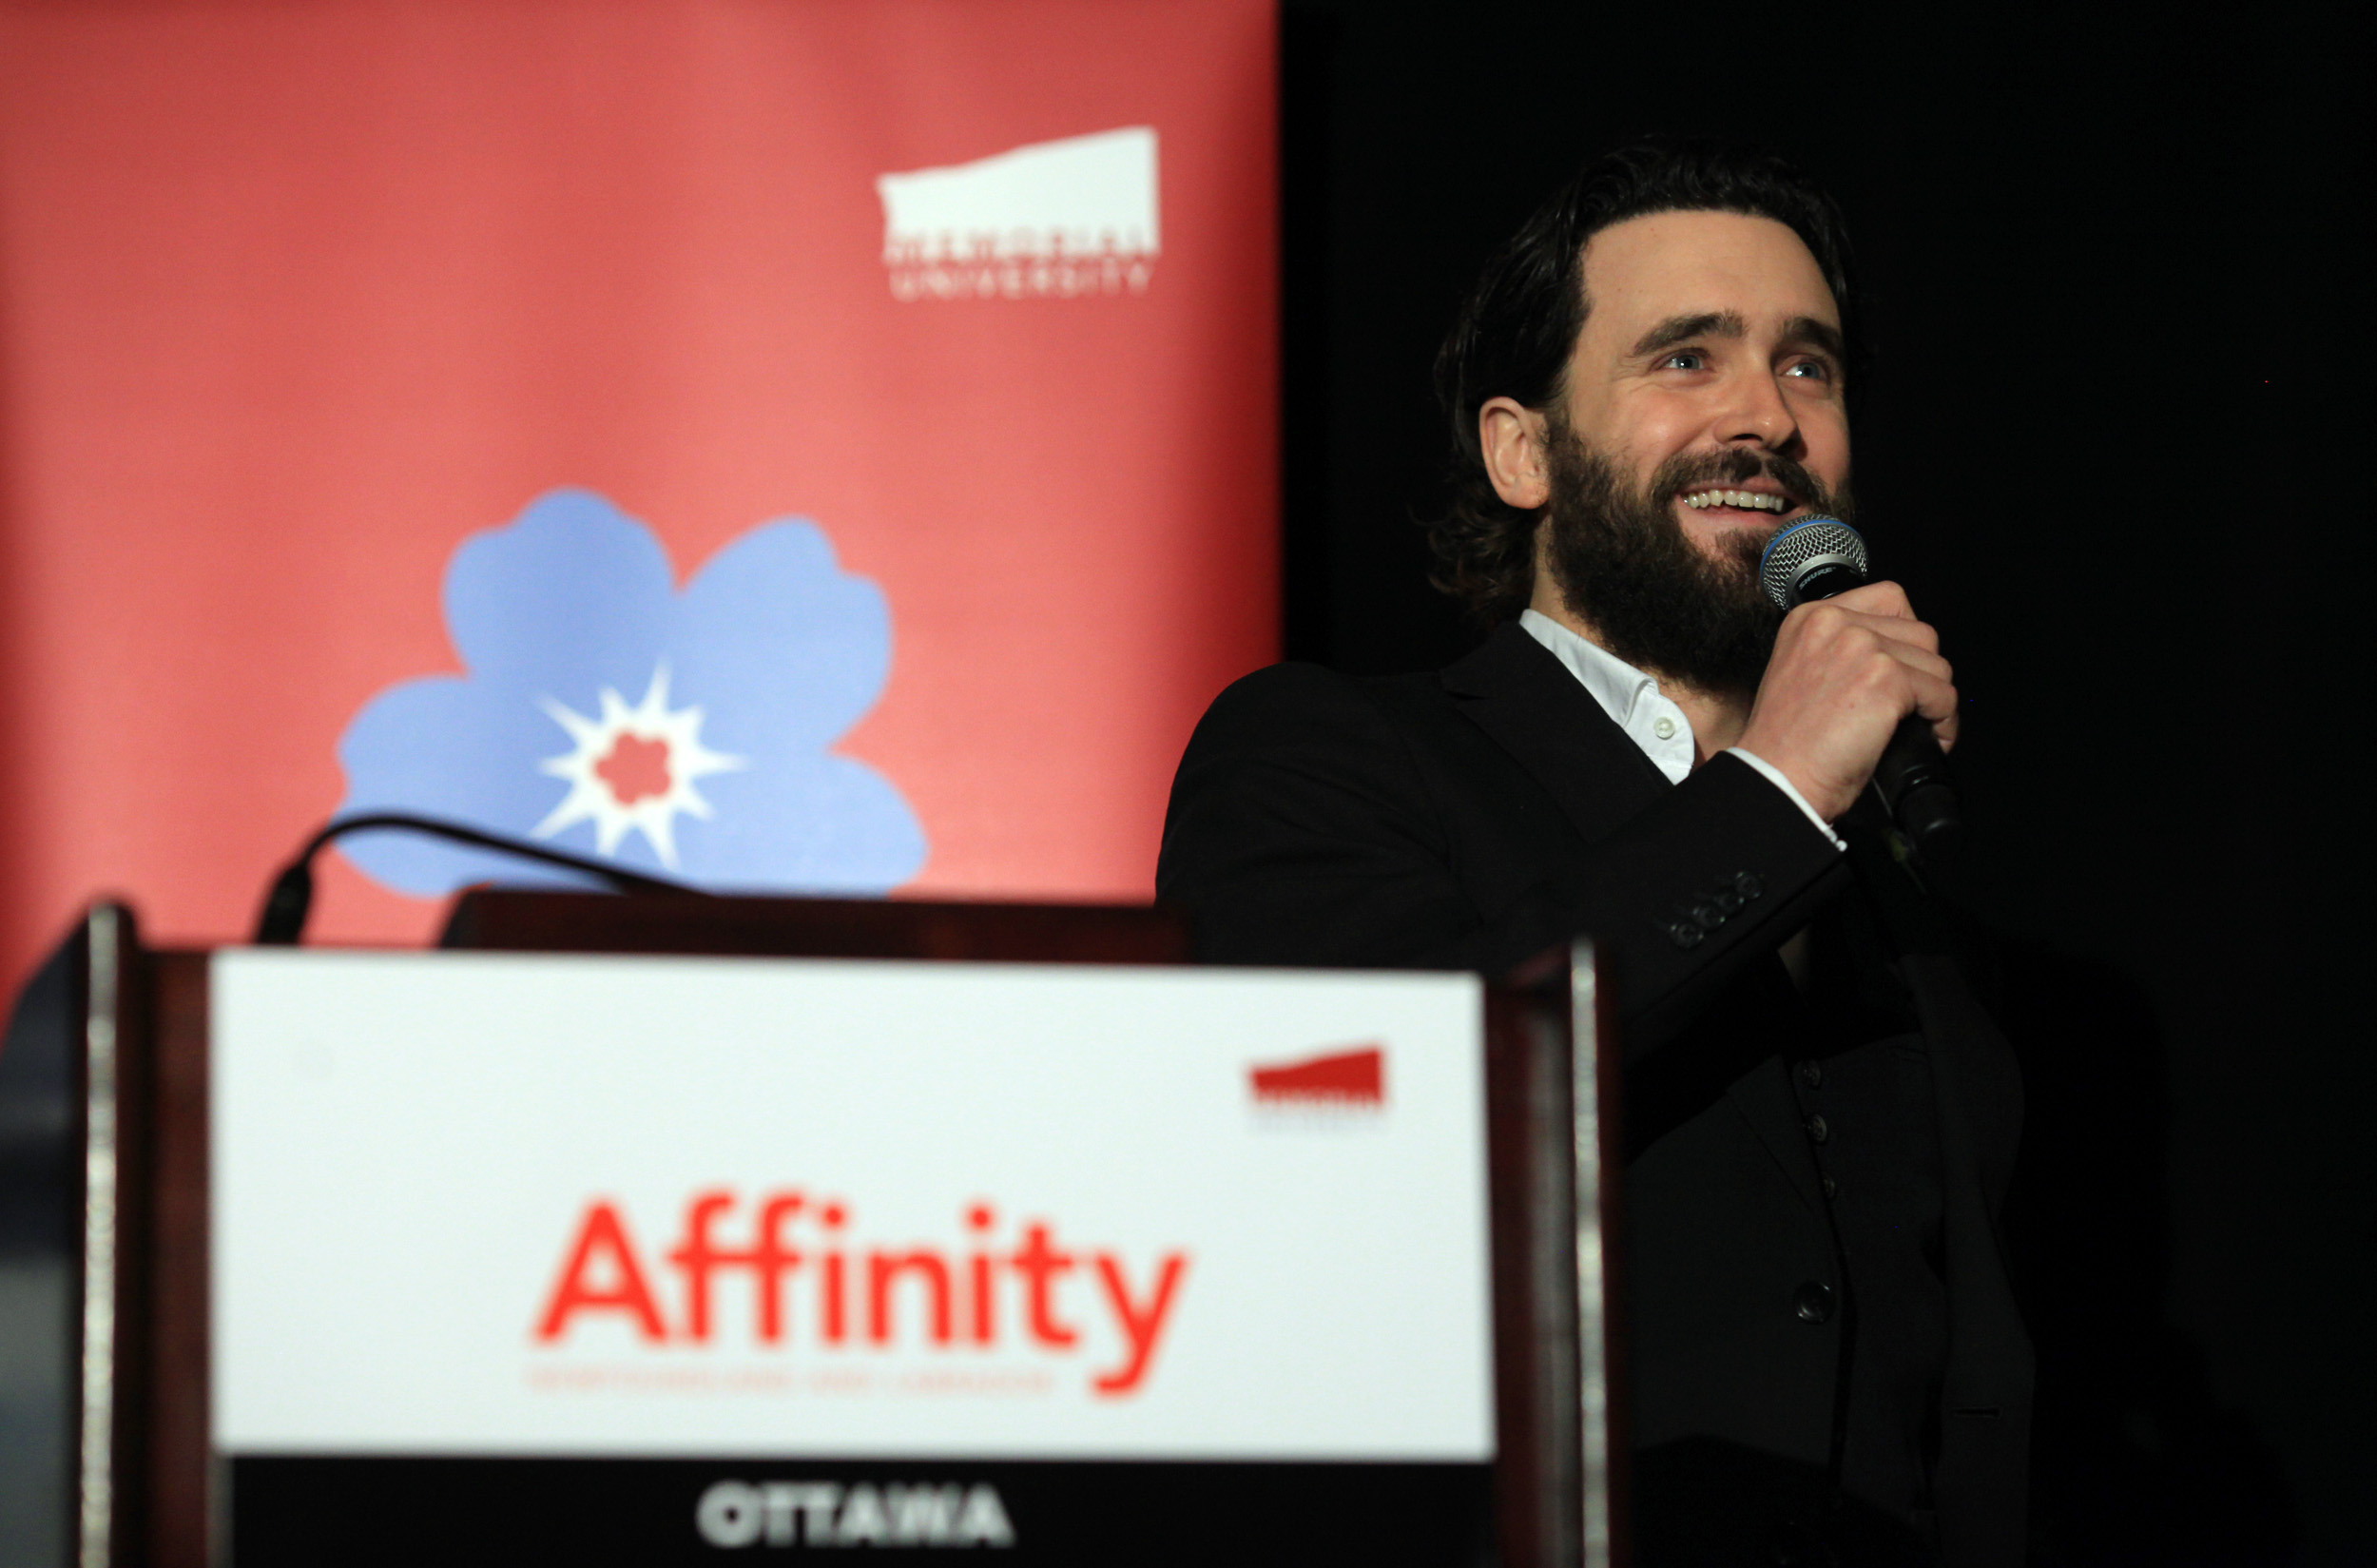 Allan Hawco delivers the keynote address at 15th annual Ottawa Affinity Dinner on Nov. 26 Credit: Dave Chan